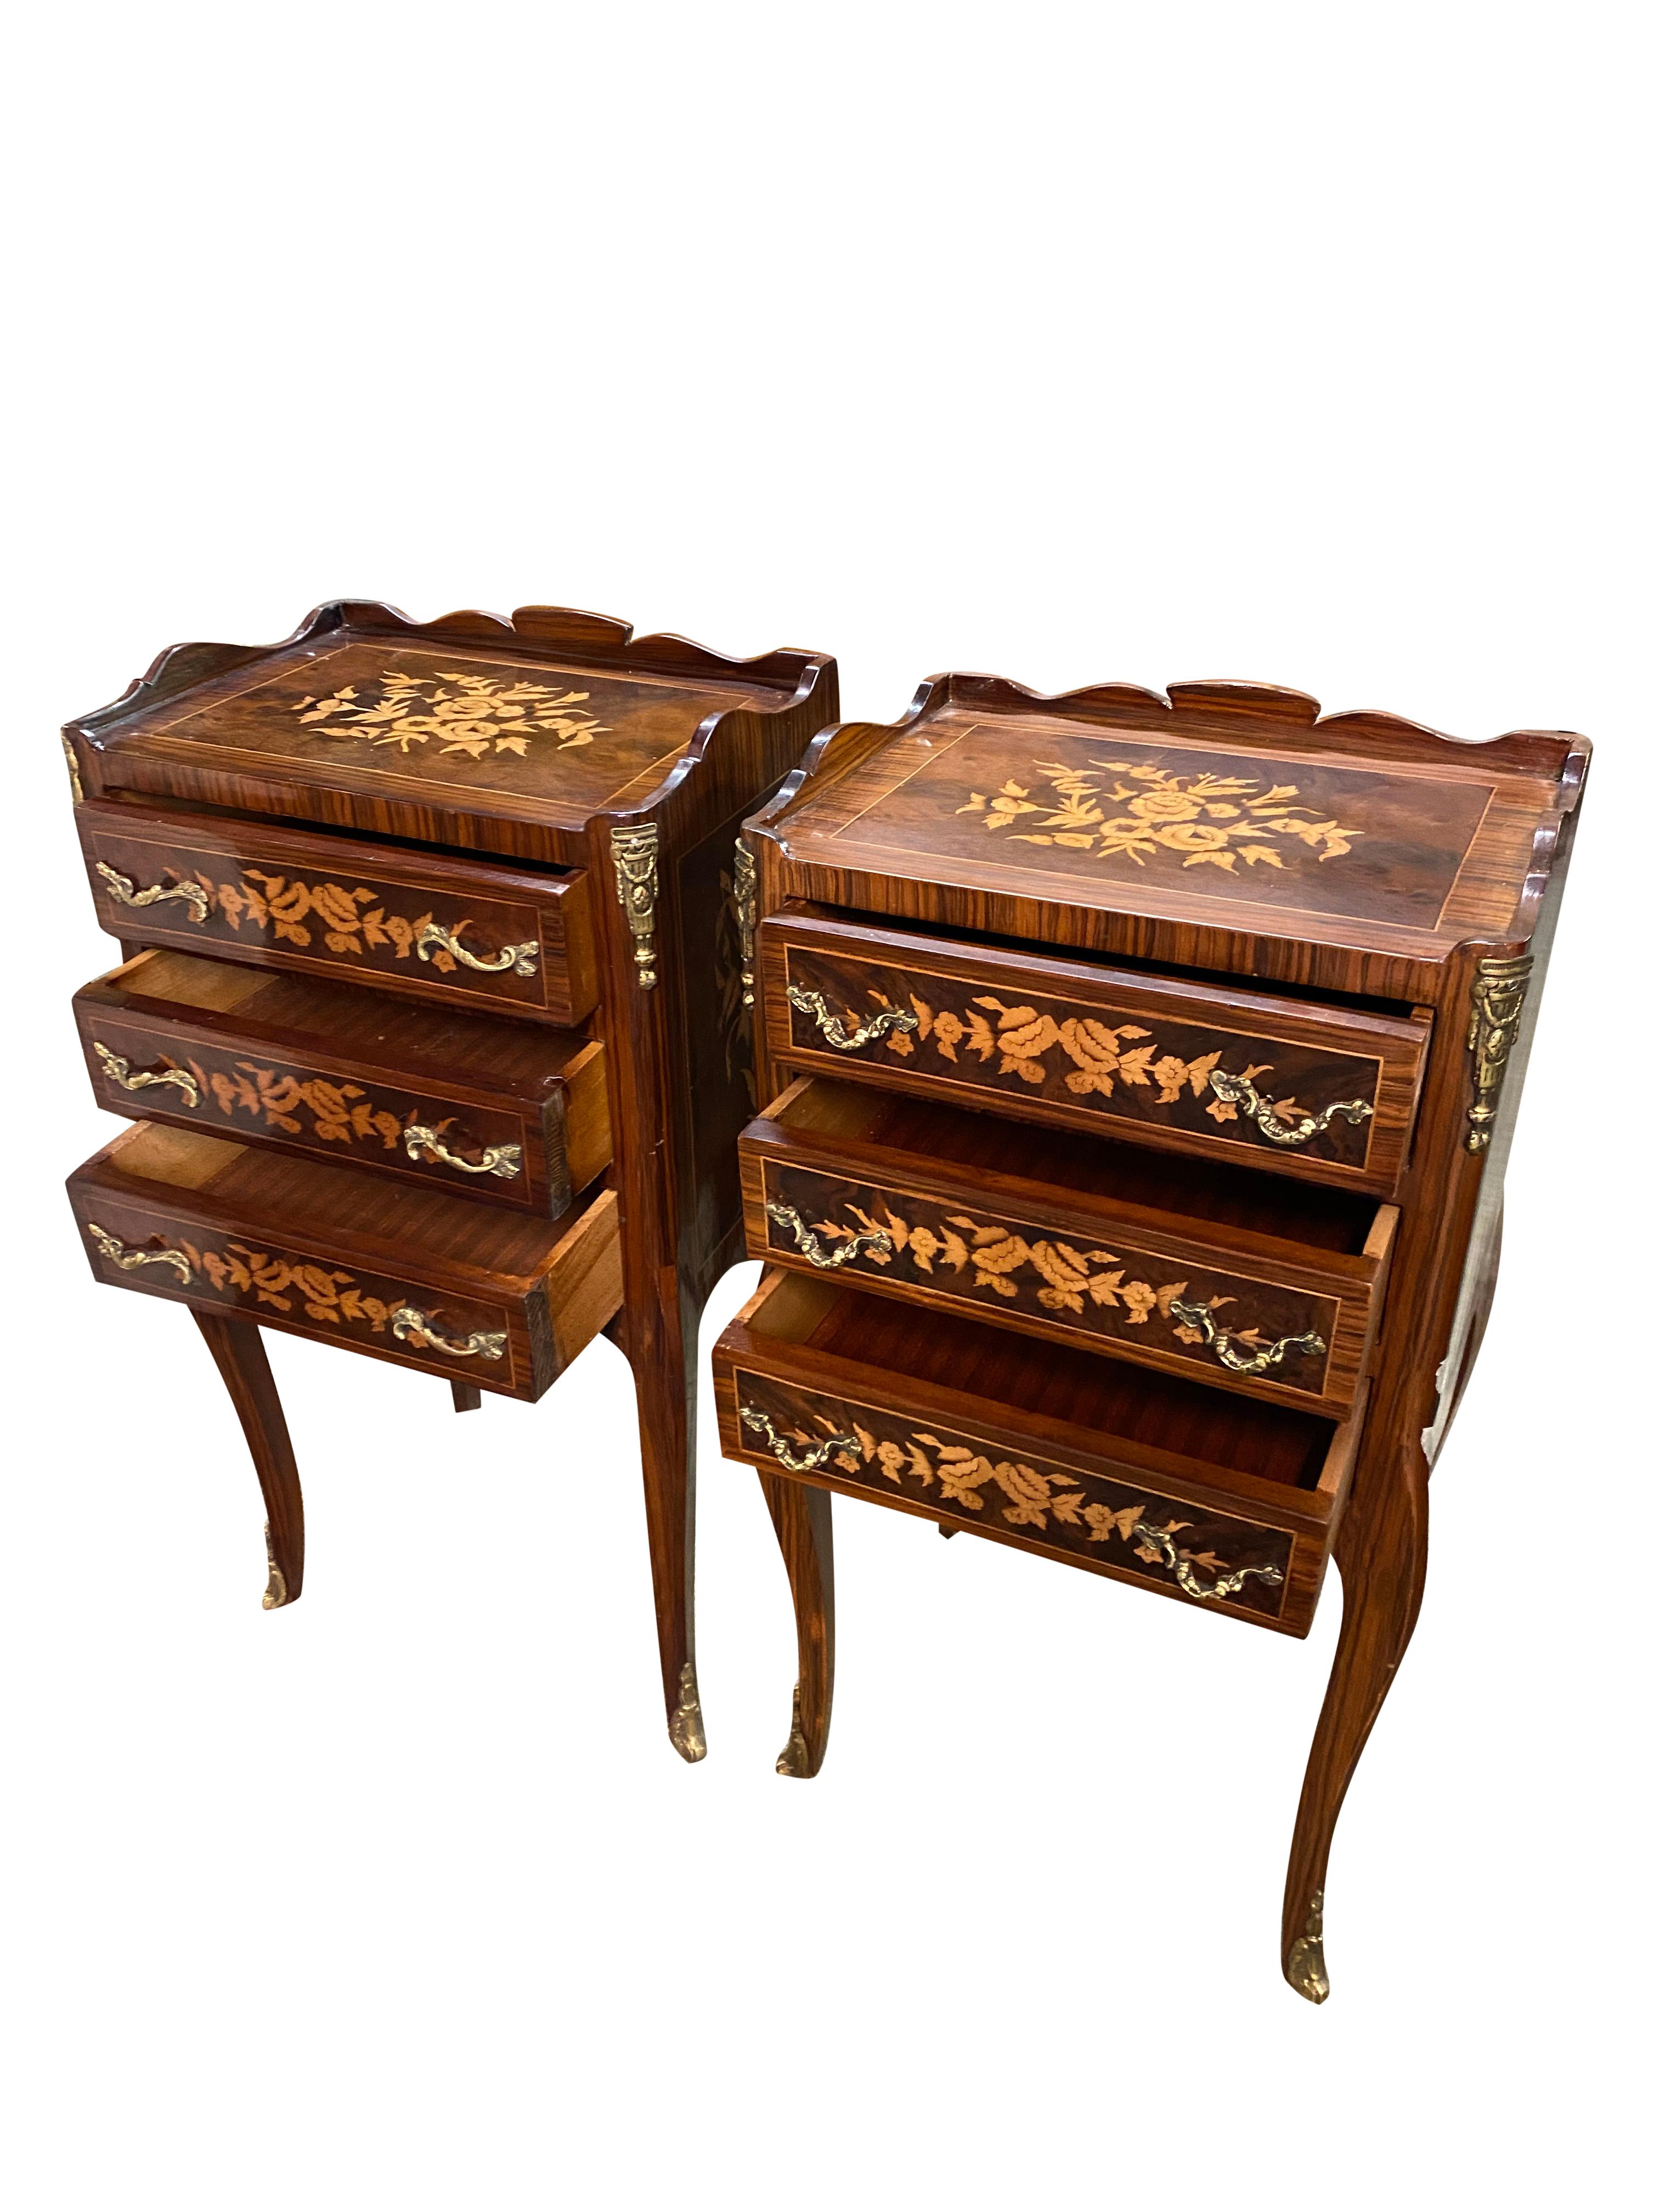 Pair of 20th Century English Regency Style Side Tables For Sale 11